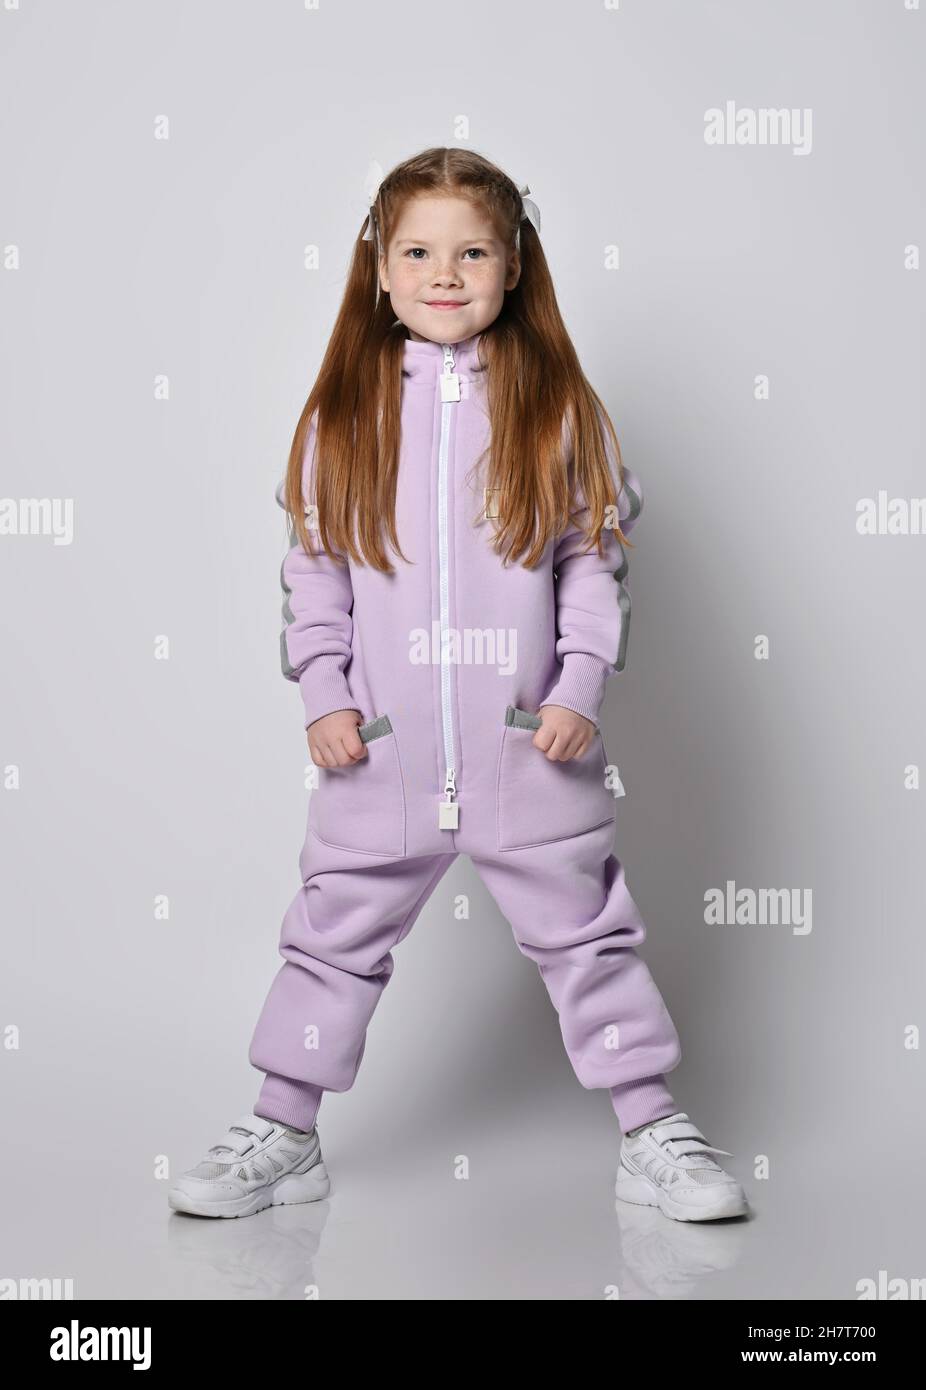 Smiling red-haired kid girl in pink jumpsuit with zipper stands with legs wide apart holding hands in pockets Stock Photo